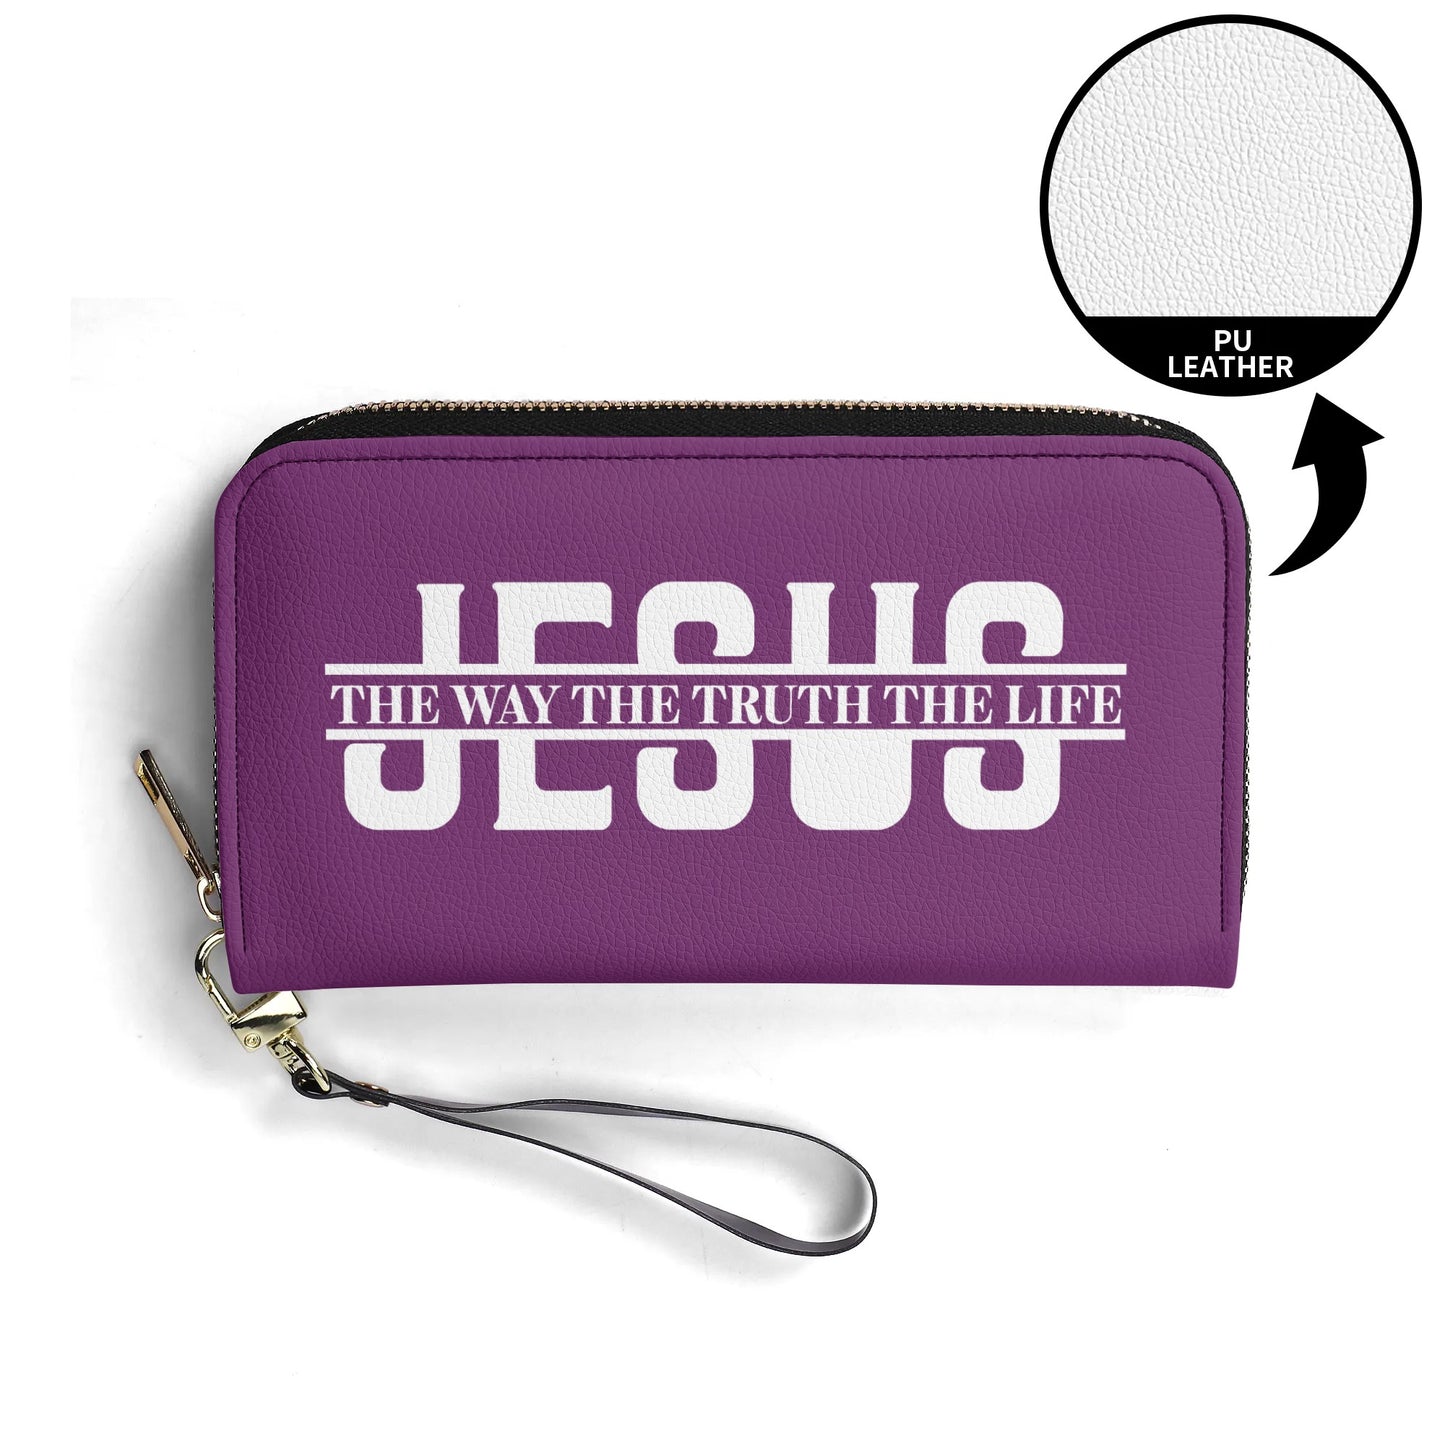 Jesus The Way The Truth The Life PU Leather Womens Christian Wallet